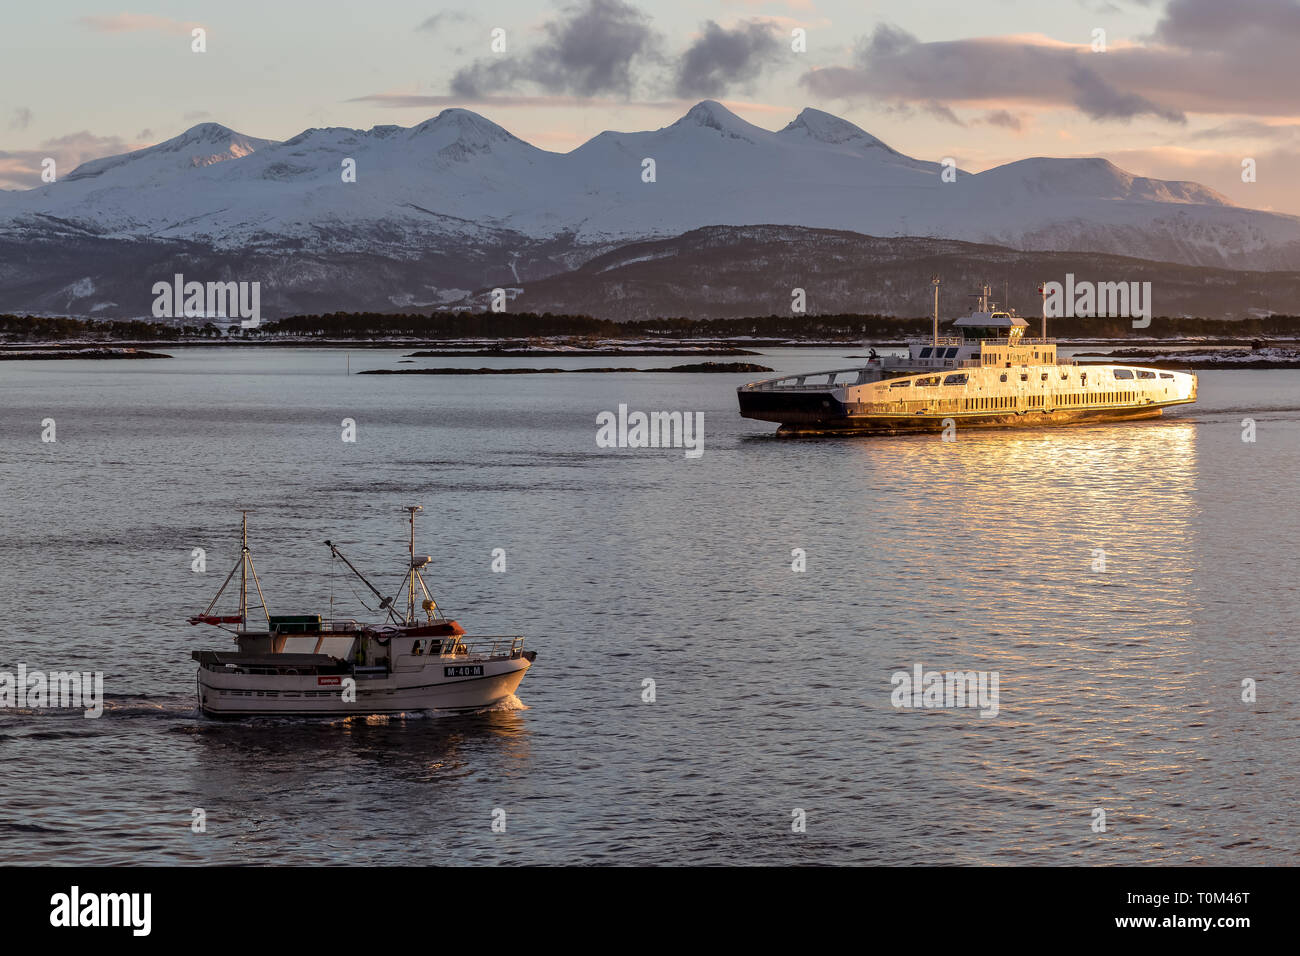 The Norwegian ferry Fannefjord and a small fishing boat, outside the town of Molde in Norway. Stock Photo